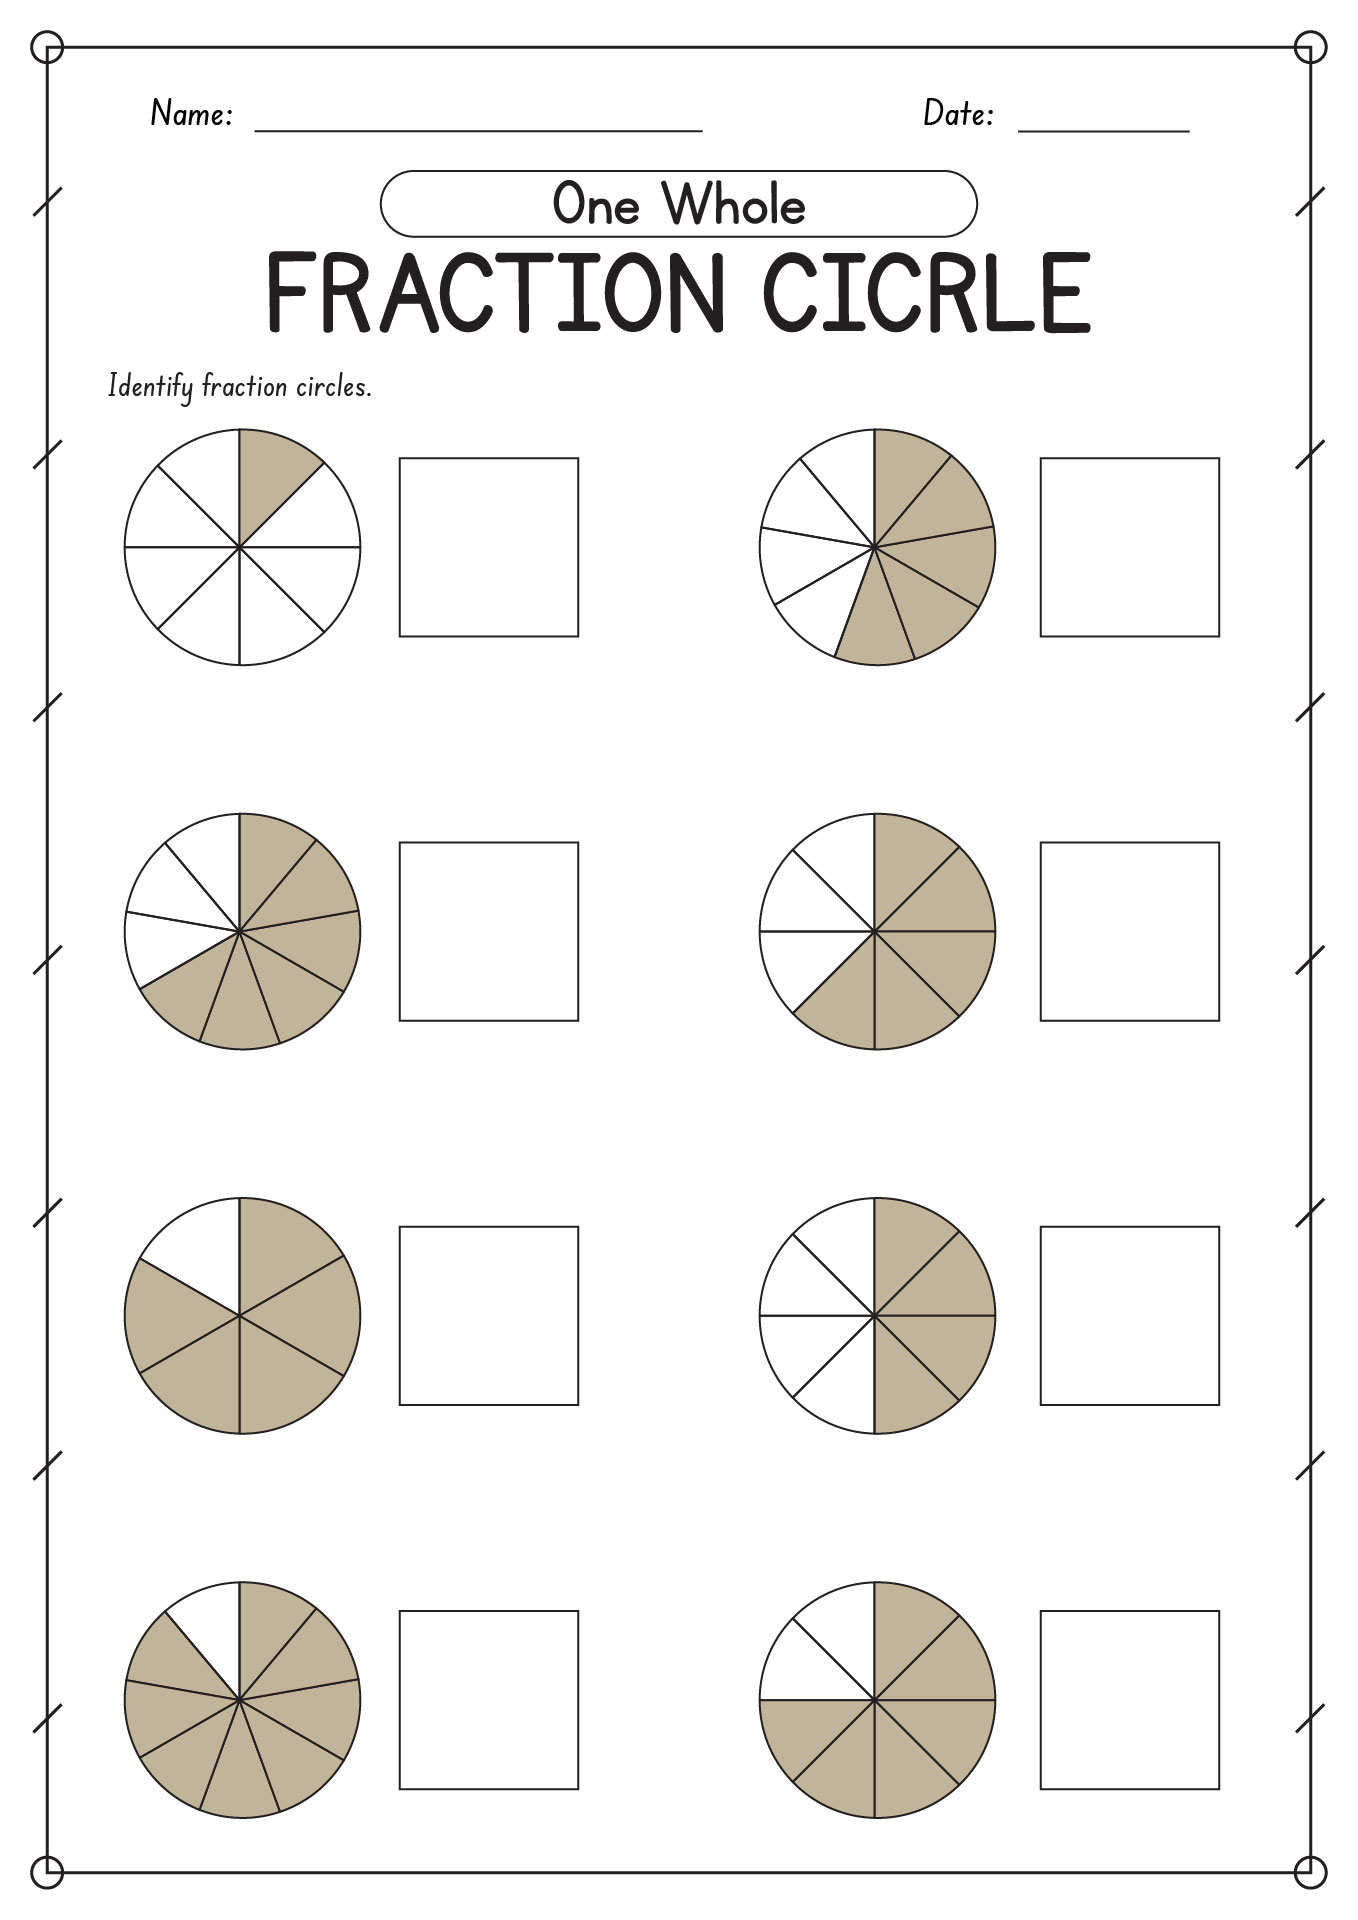 One Whole Fraction Circle